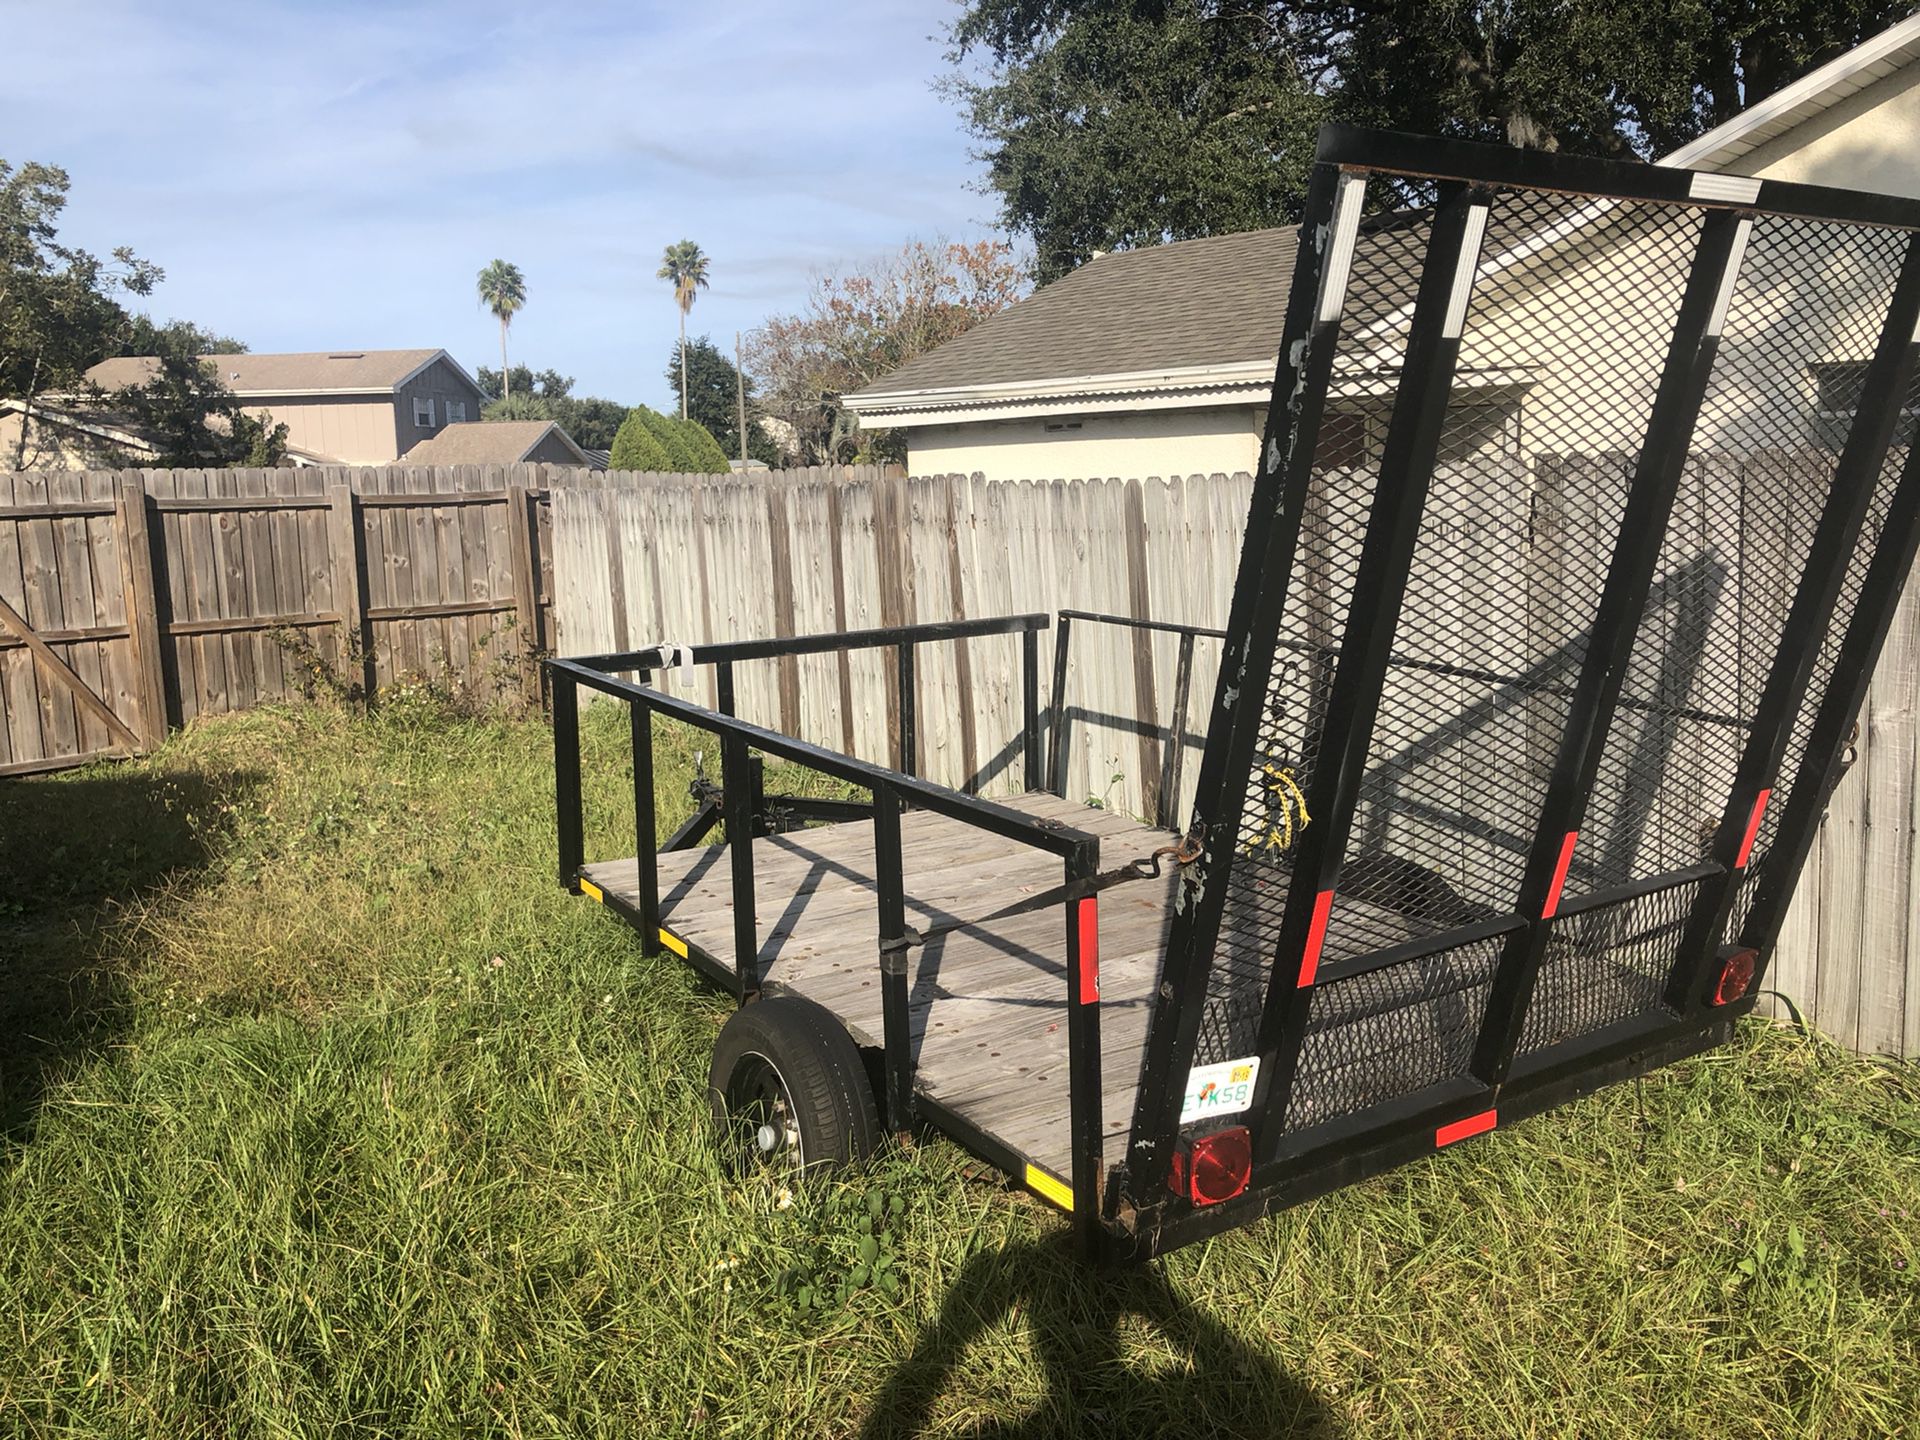 Price reduced Trailer with lights and removable rails extra large steel gate easy access to drive up with mower or equipment